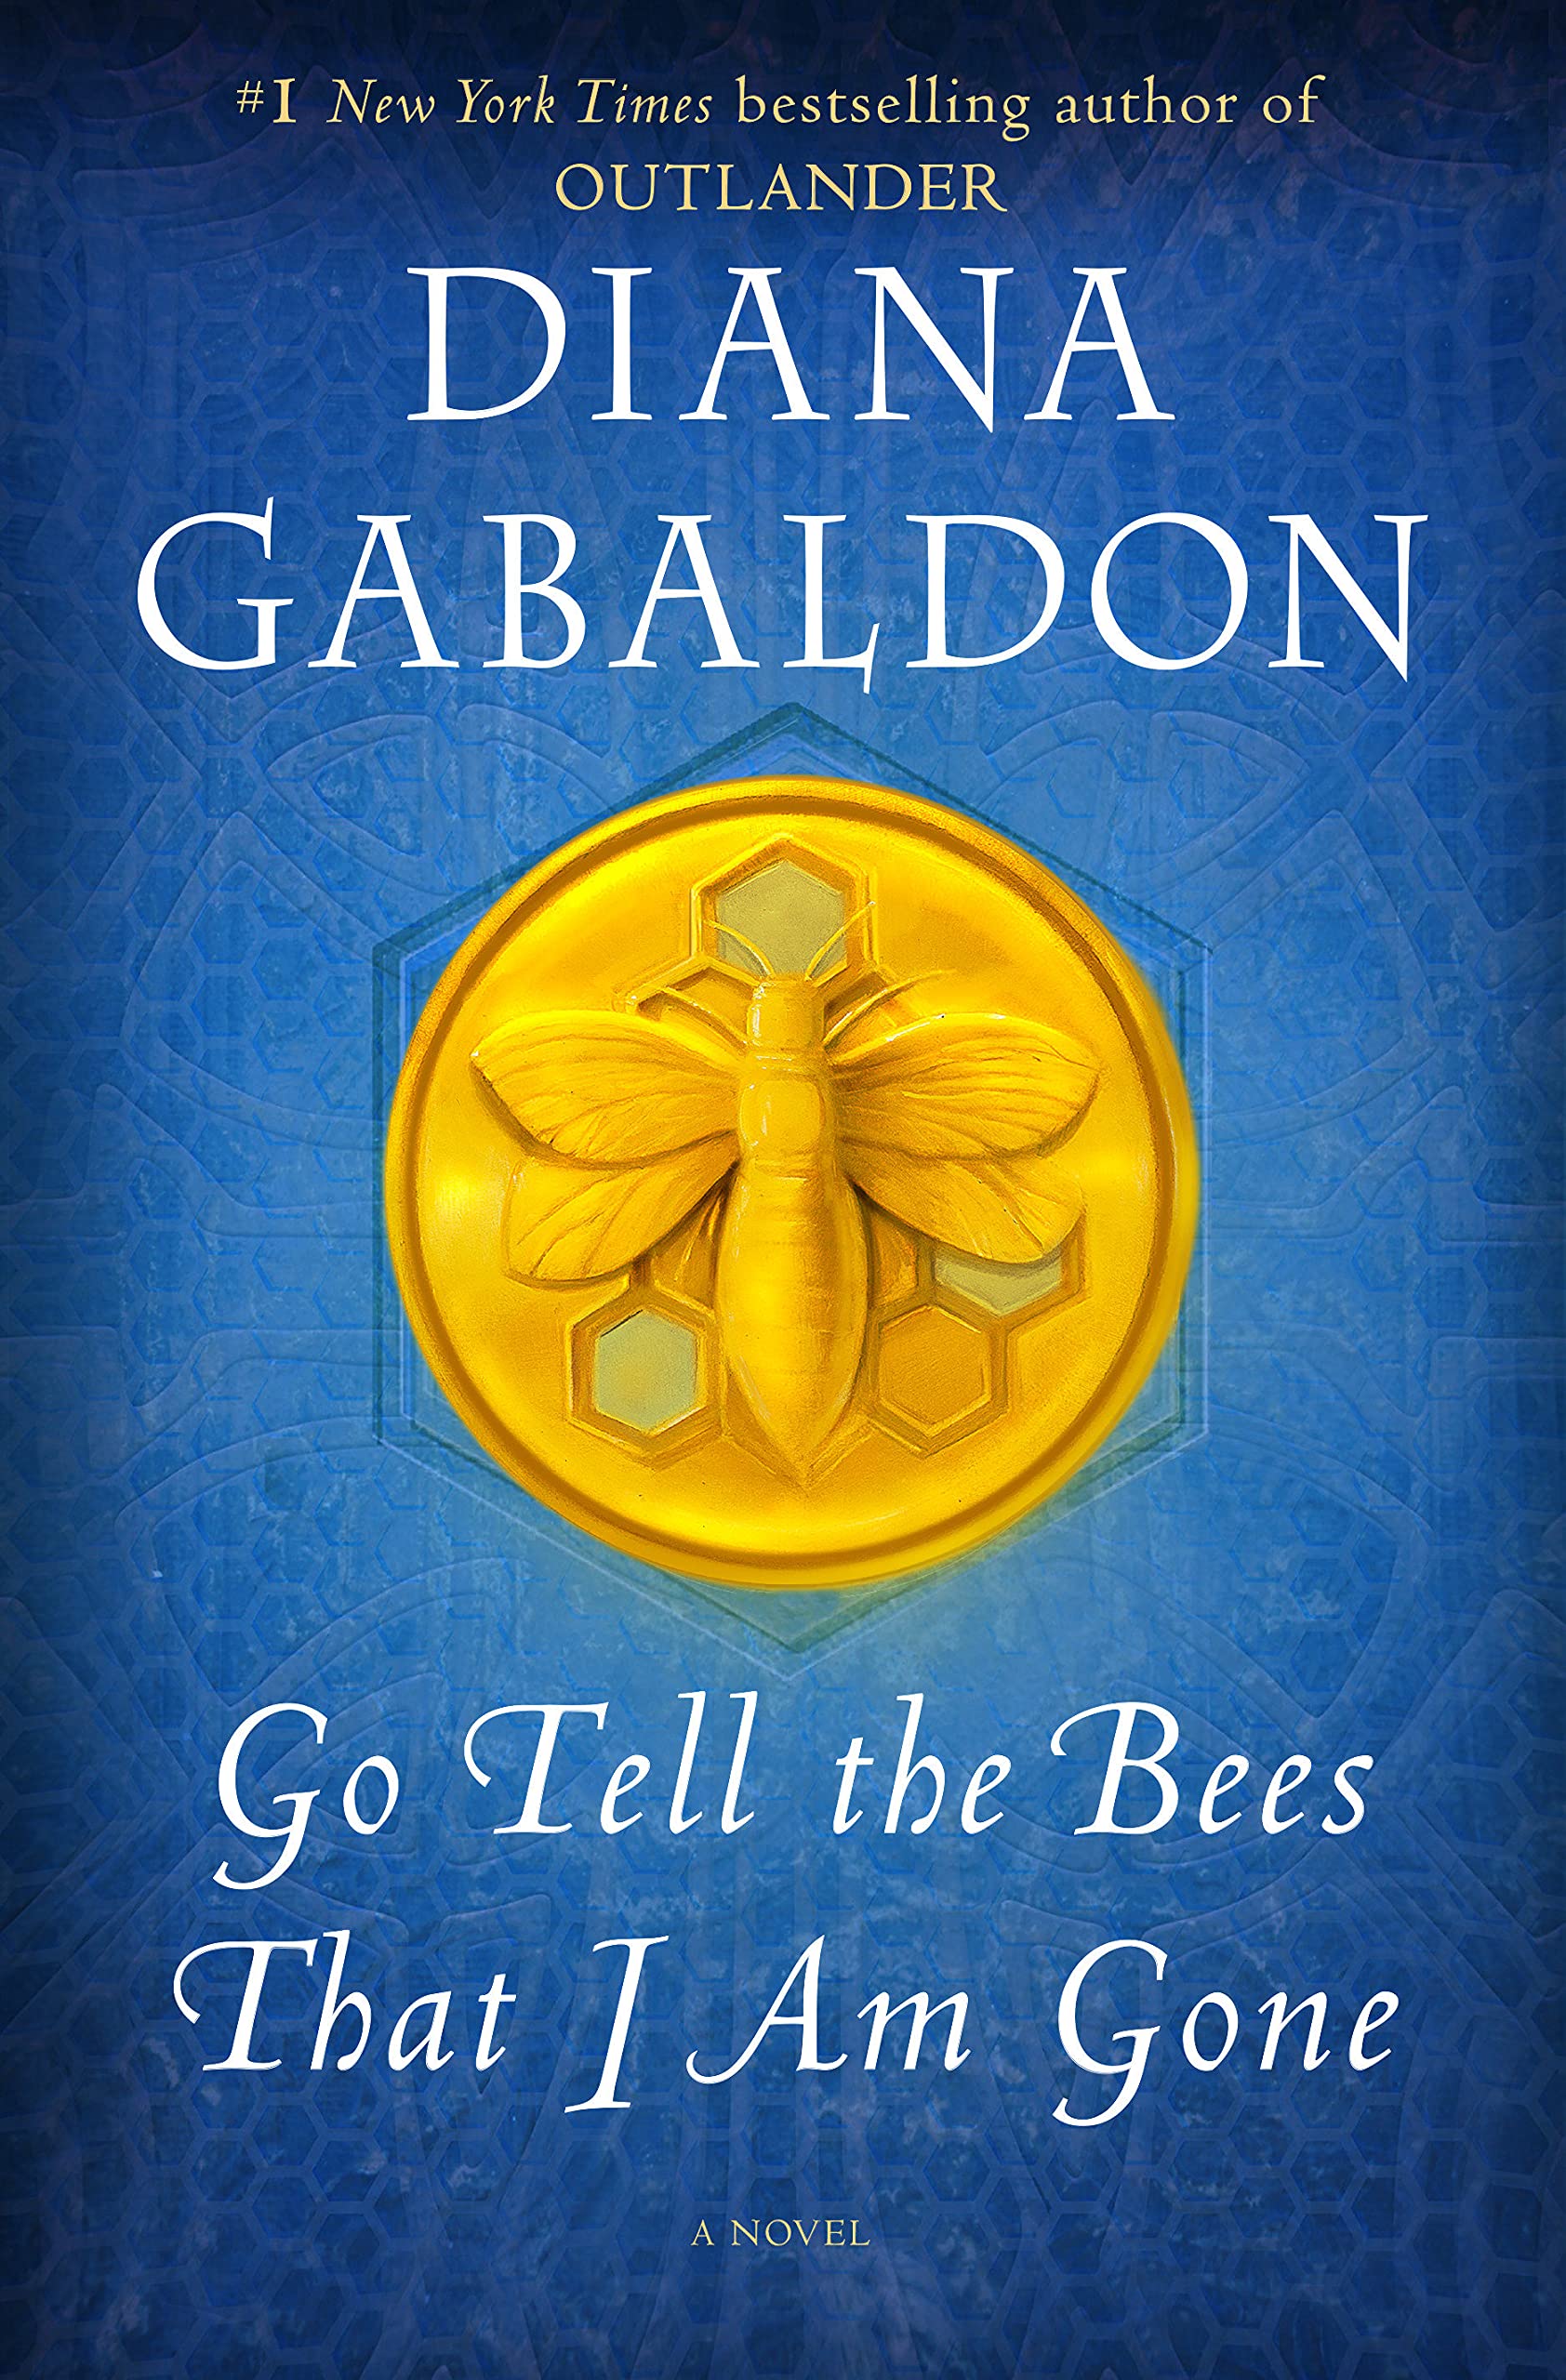 Image for "Go Tell the Bees That I Am Gone"